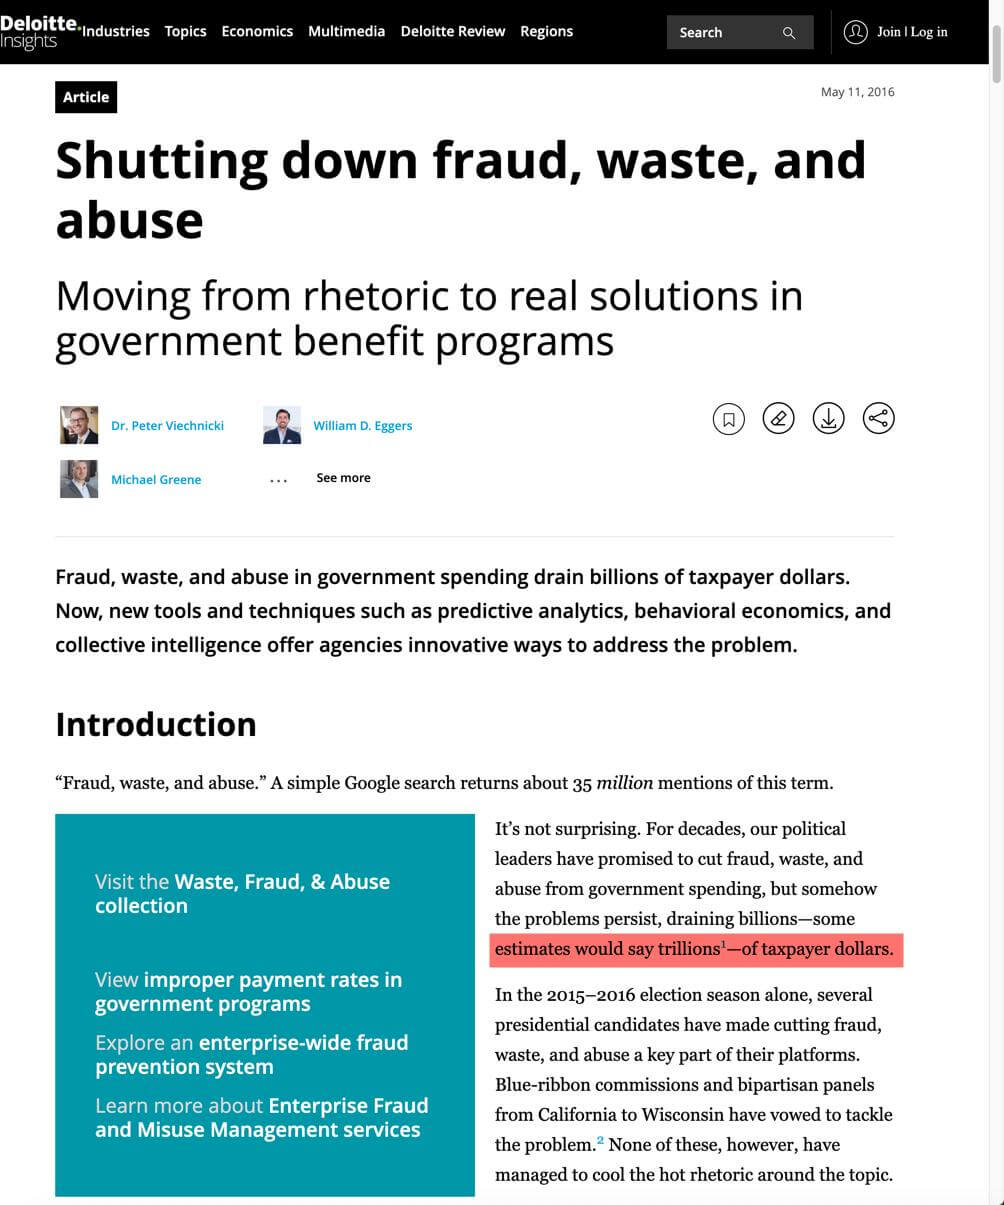 Deloitte's report on Fraud and Waste